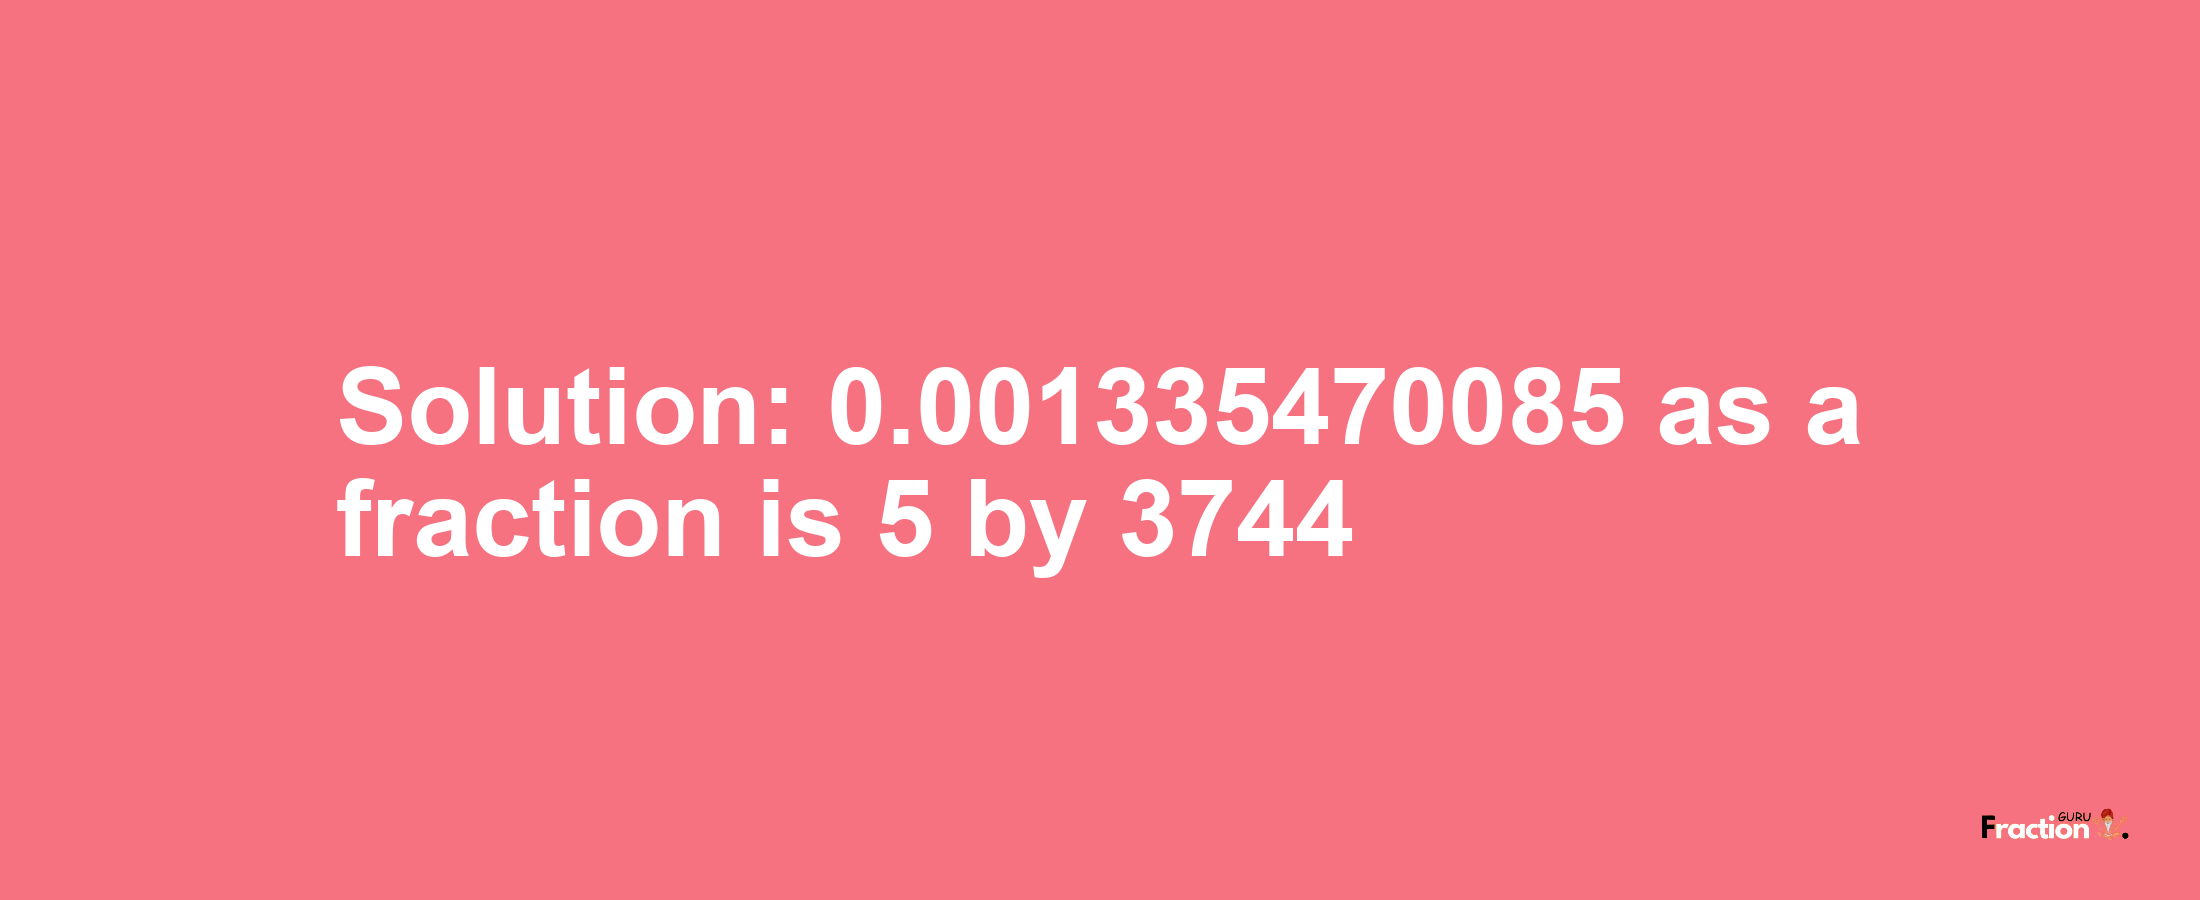 Solution:0.001335470085 as a fraction is 5/3744